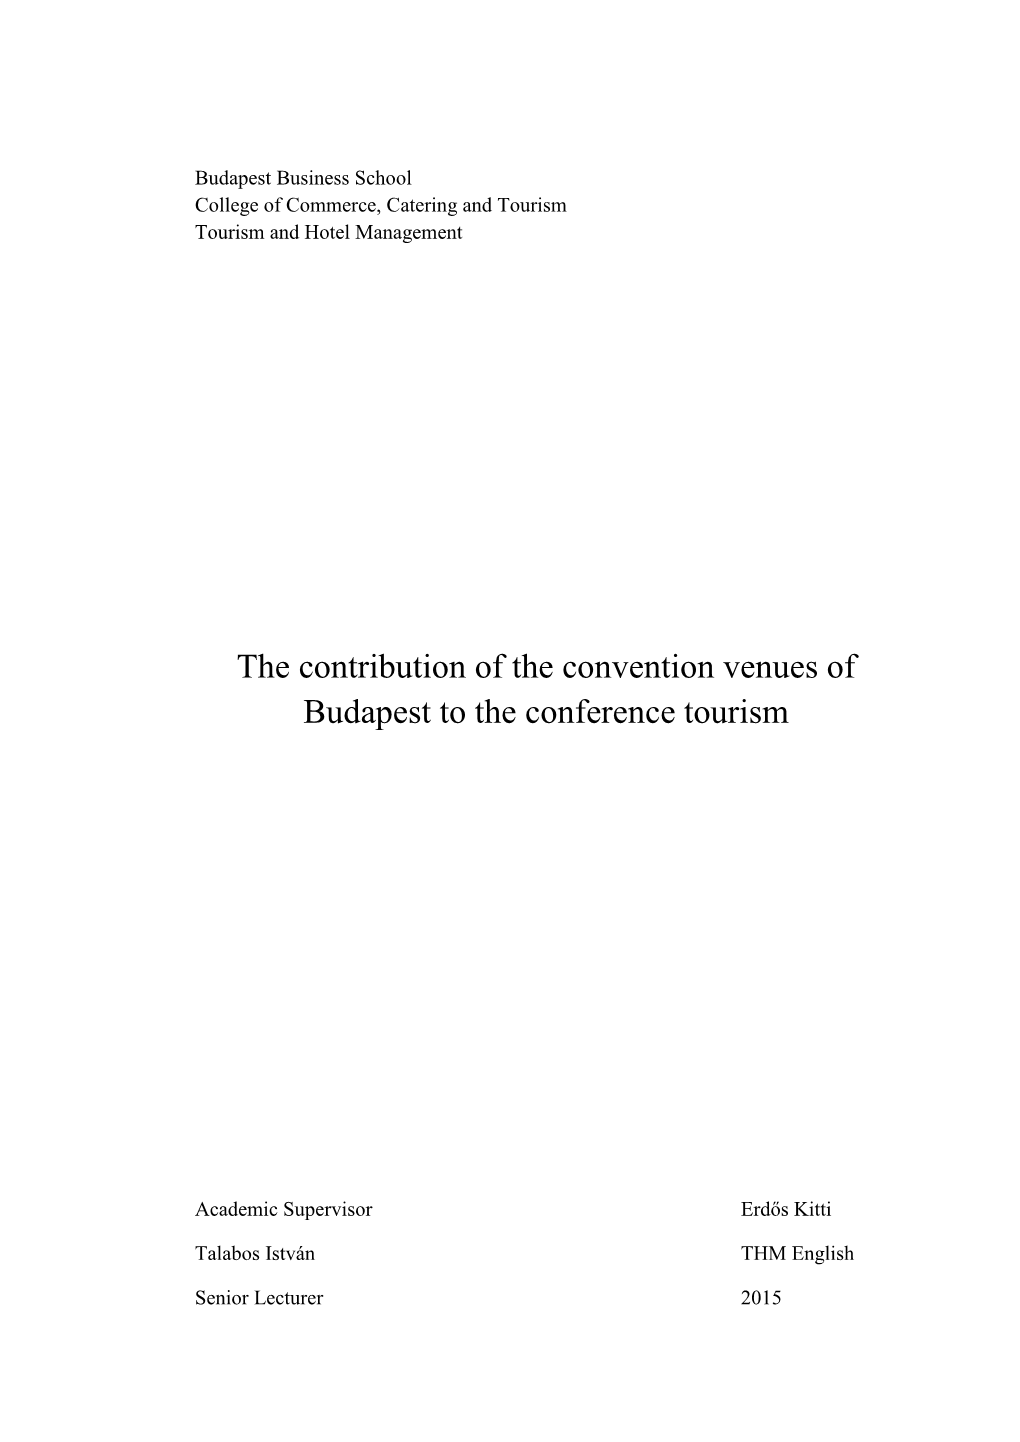 The Contribution of the Convention Venues of Budapest to the Conference Tourism